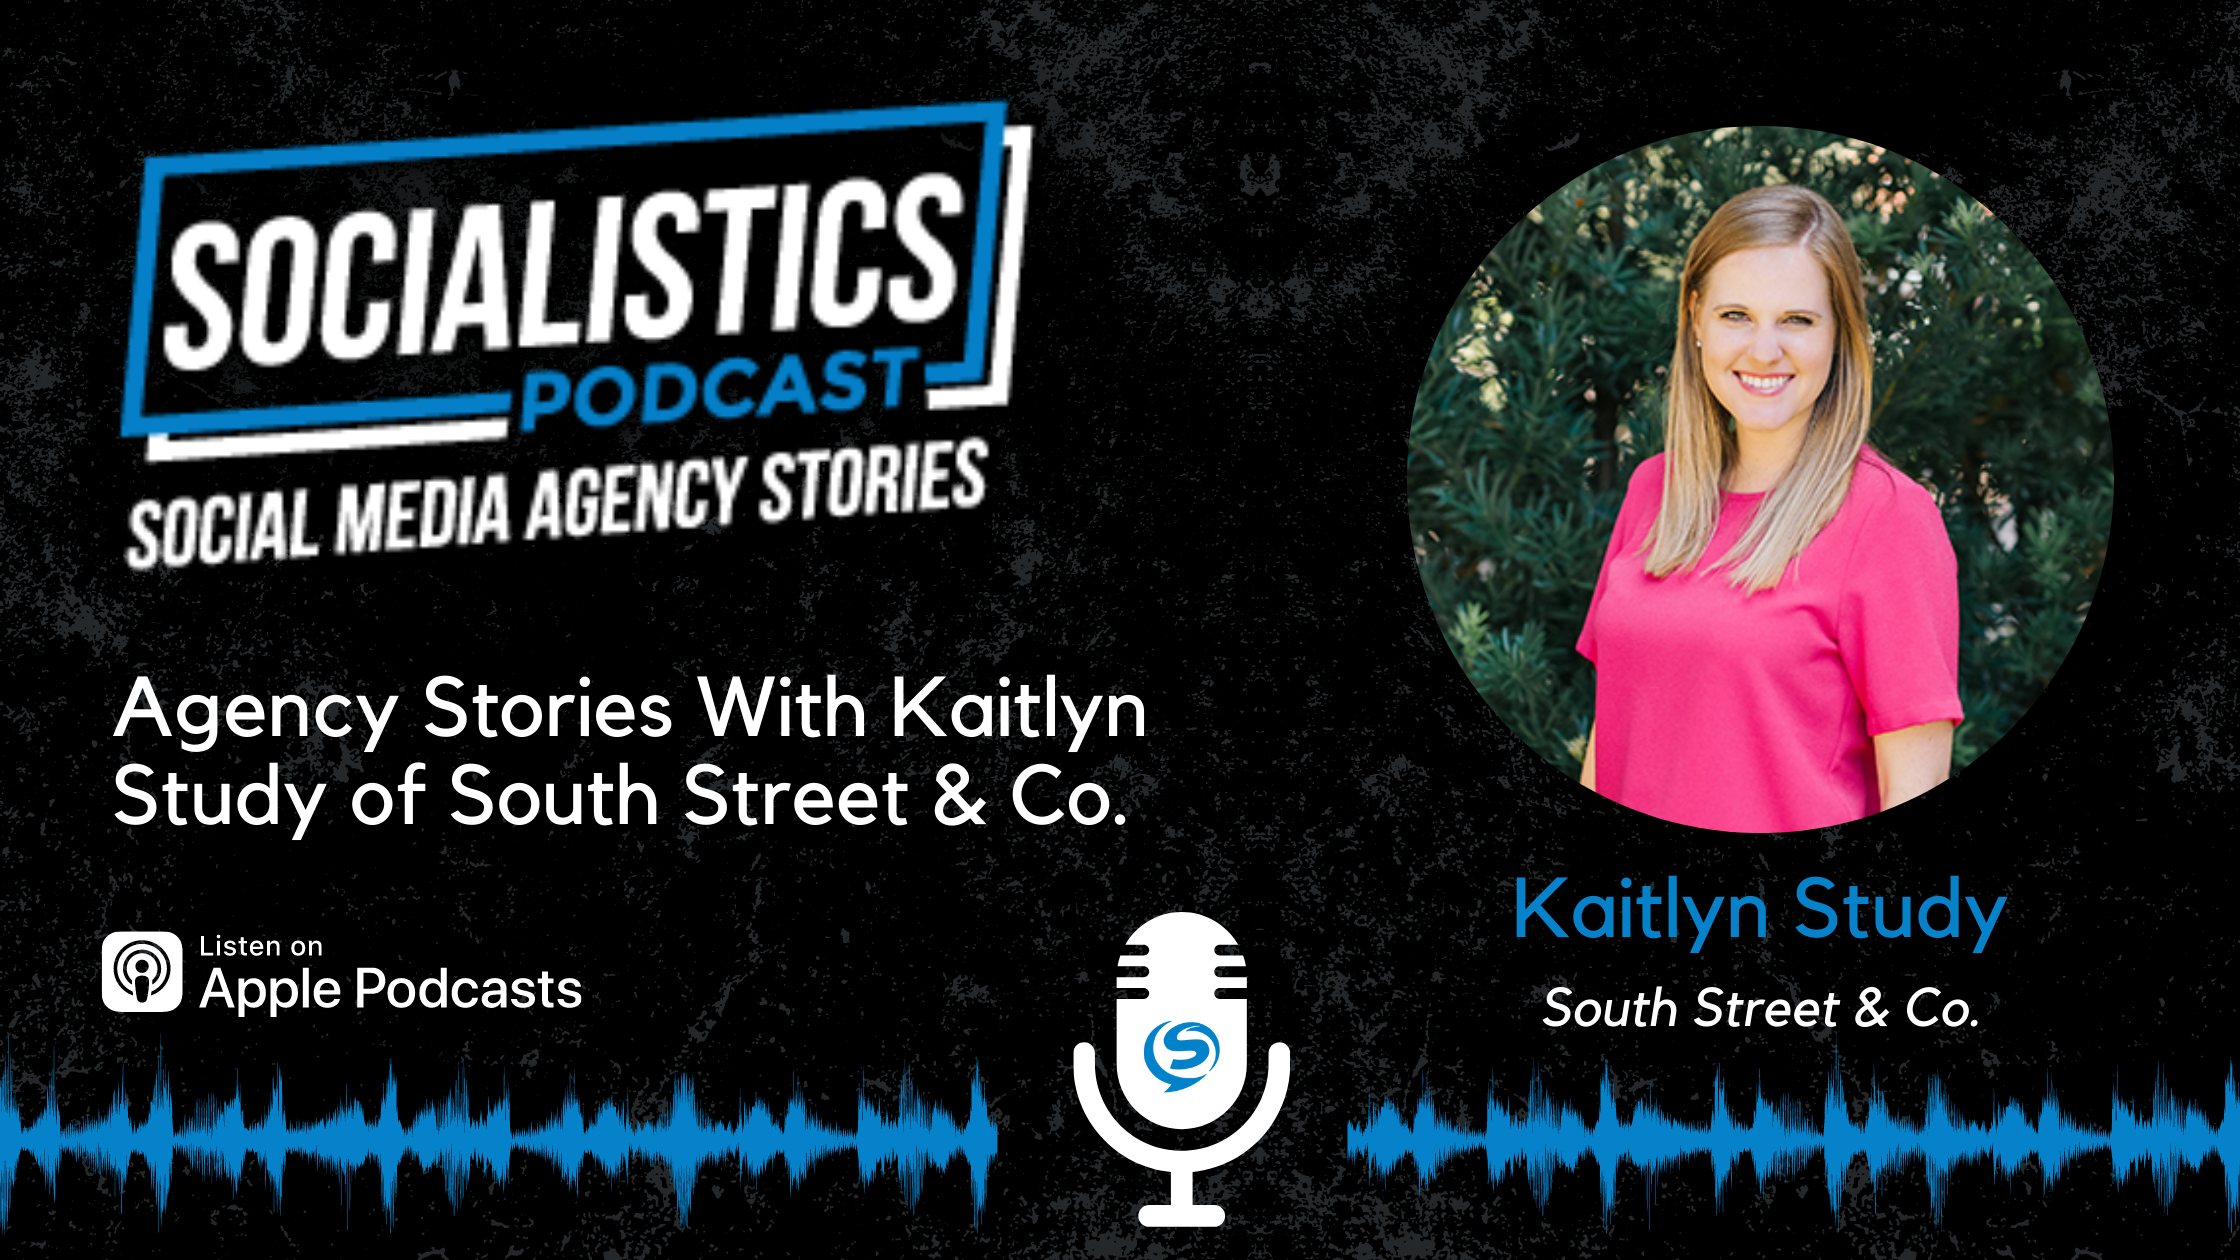 Agency Stories With Kaitlyn Study of South Street & Co.